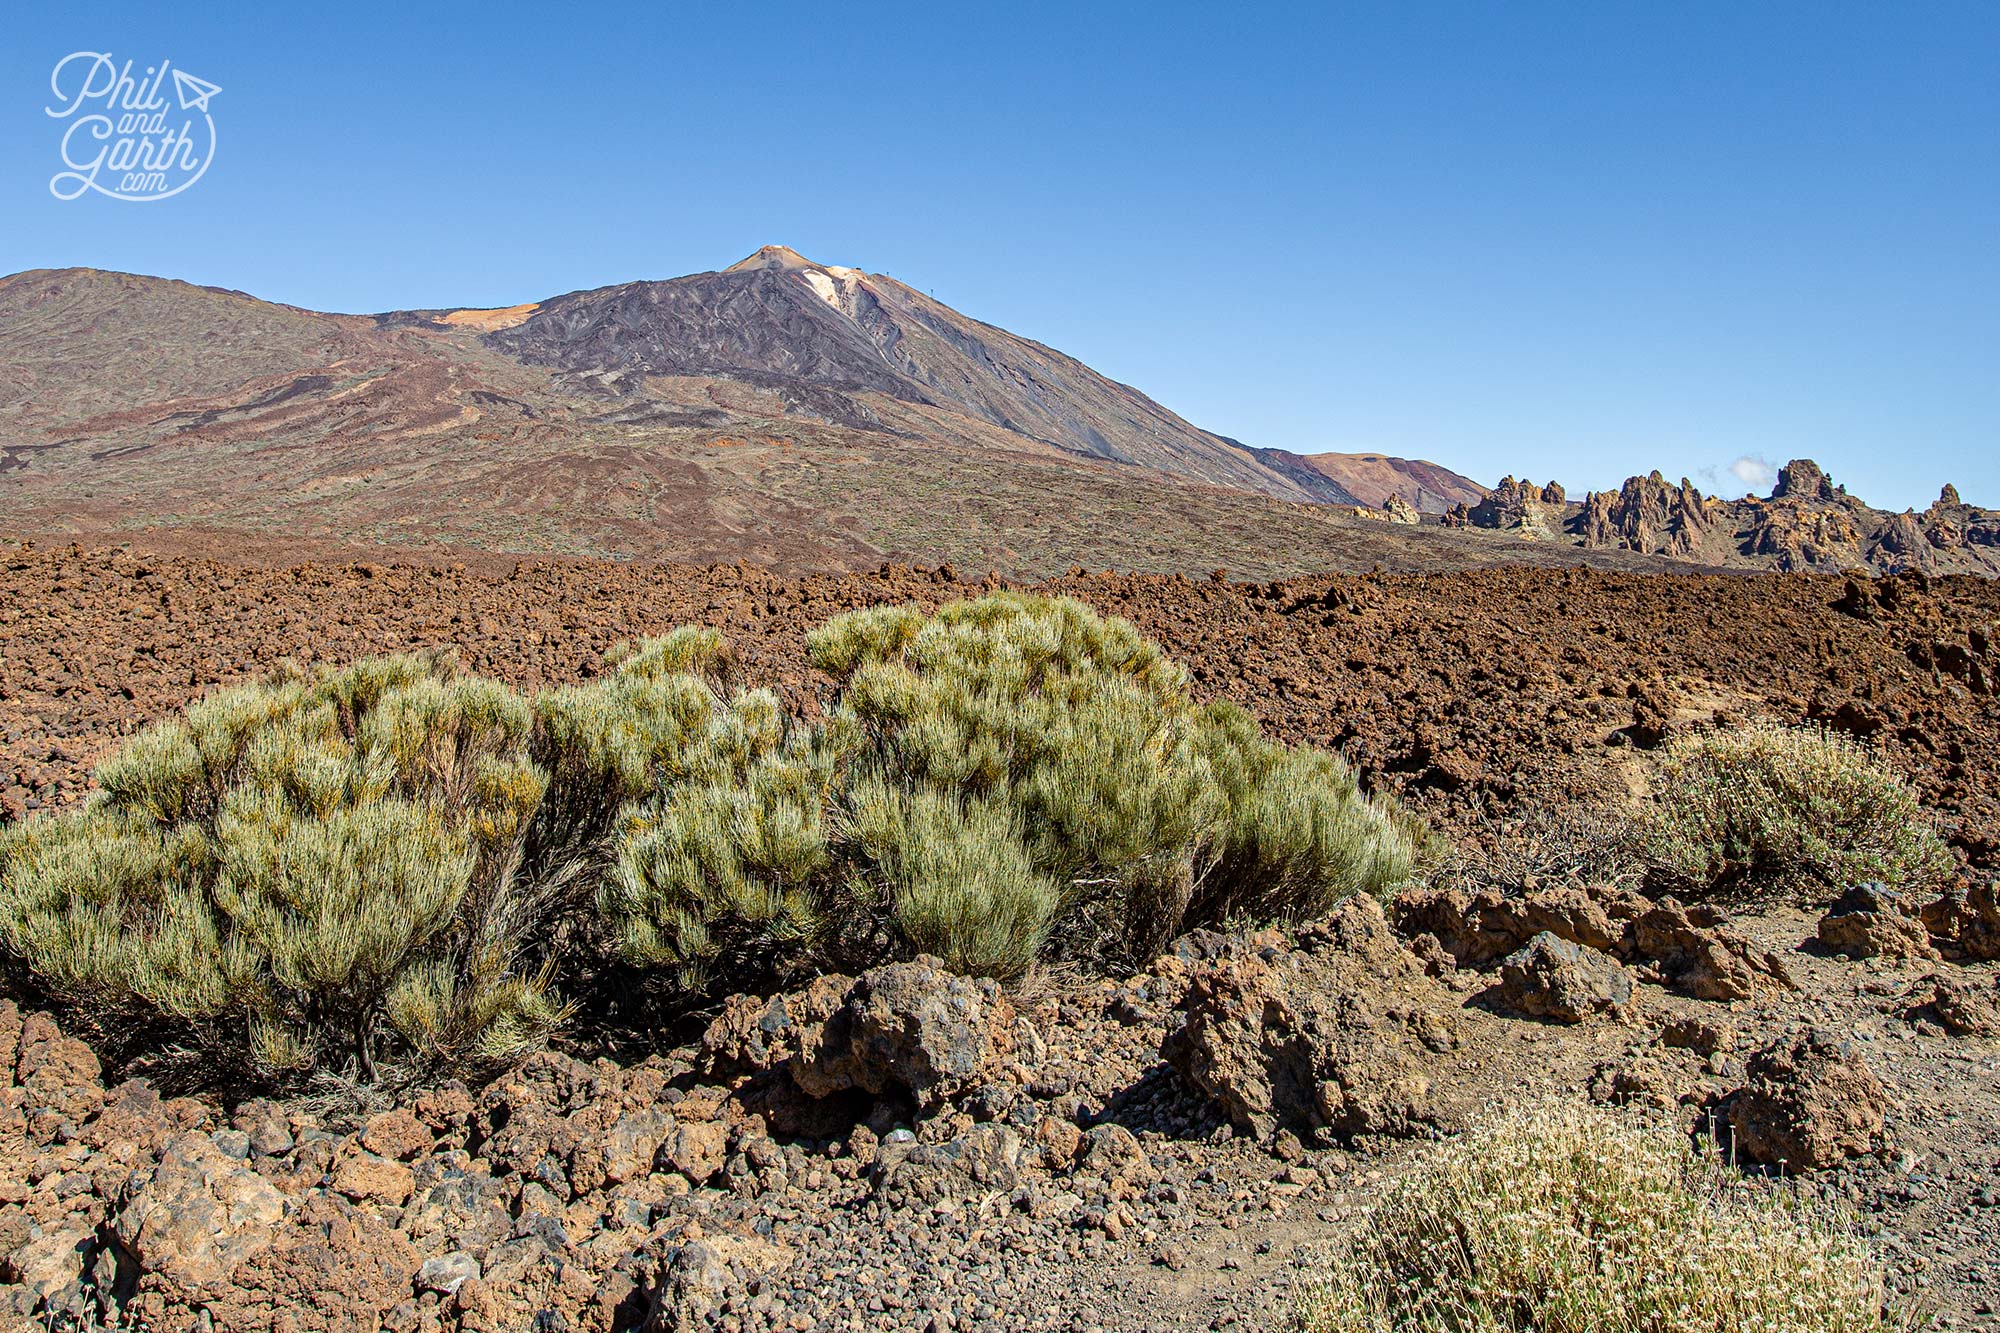 The mighty volcano, El Teide is Tenerife’s must see natural sight